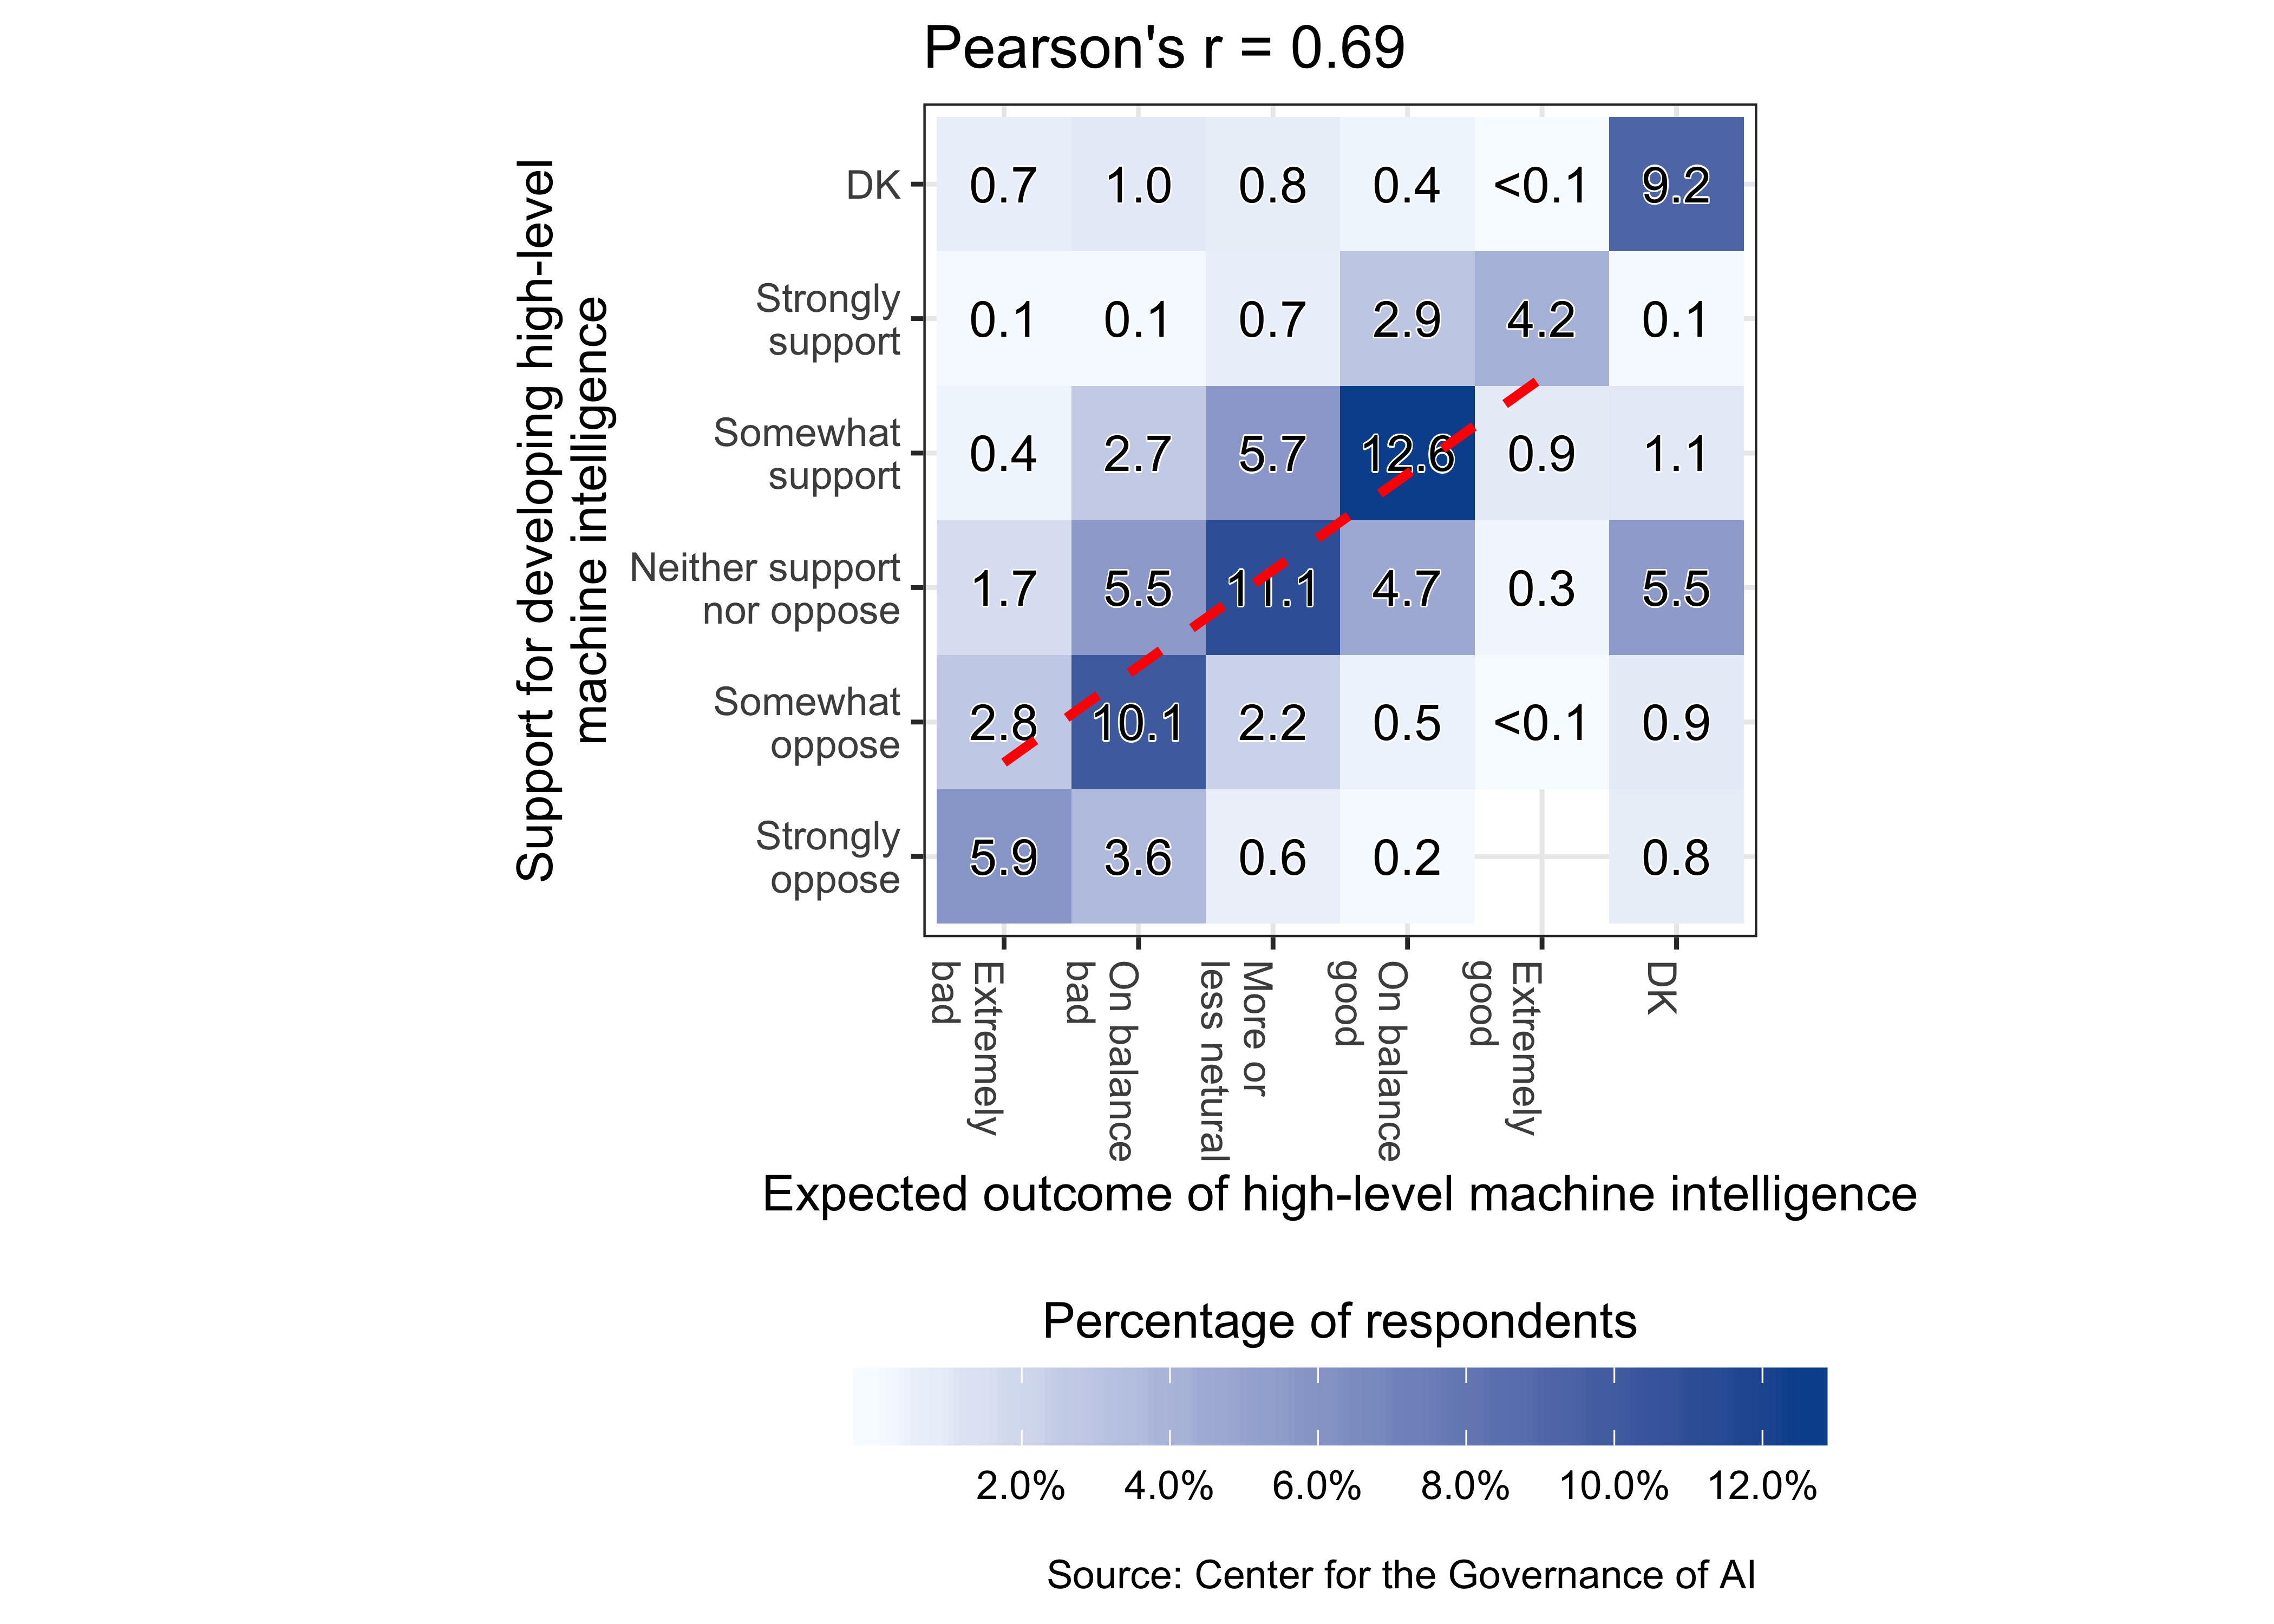 Correlation between expected outcome and support for developing high-level machine intelligence